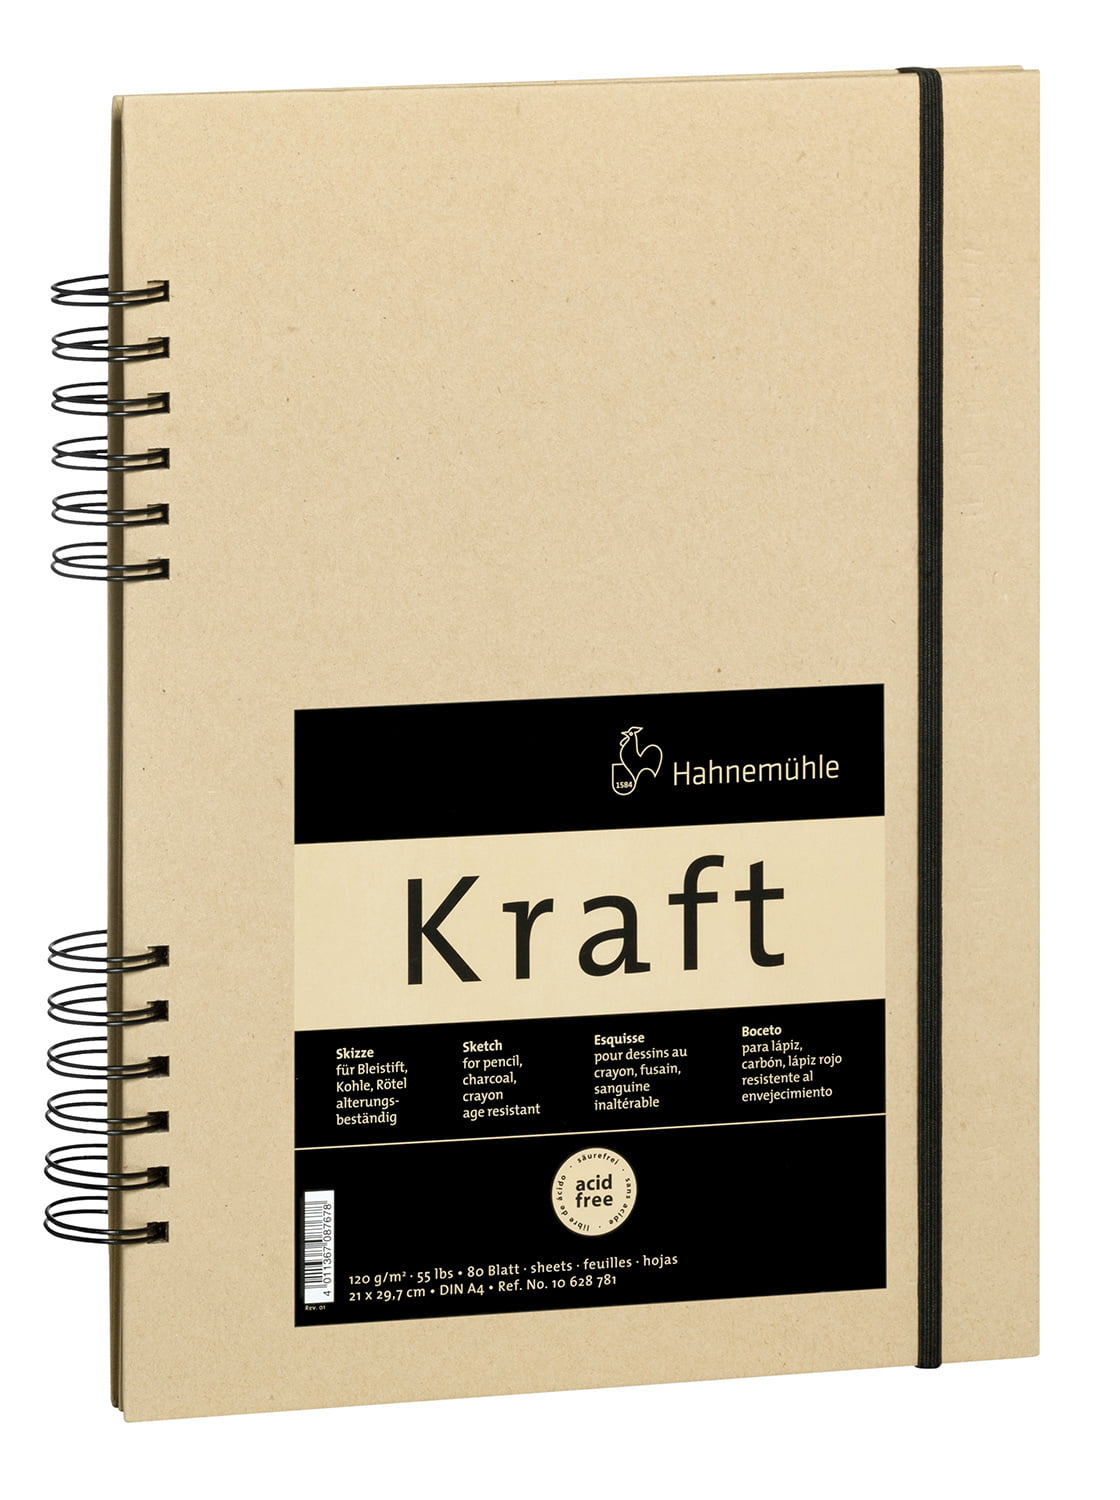 Hahnemühle Kraft Paper A4 Sketch Book (Ochre Cover, 80 Sheets) 